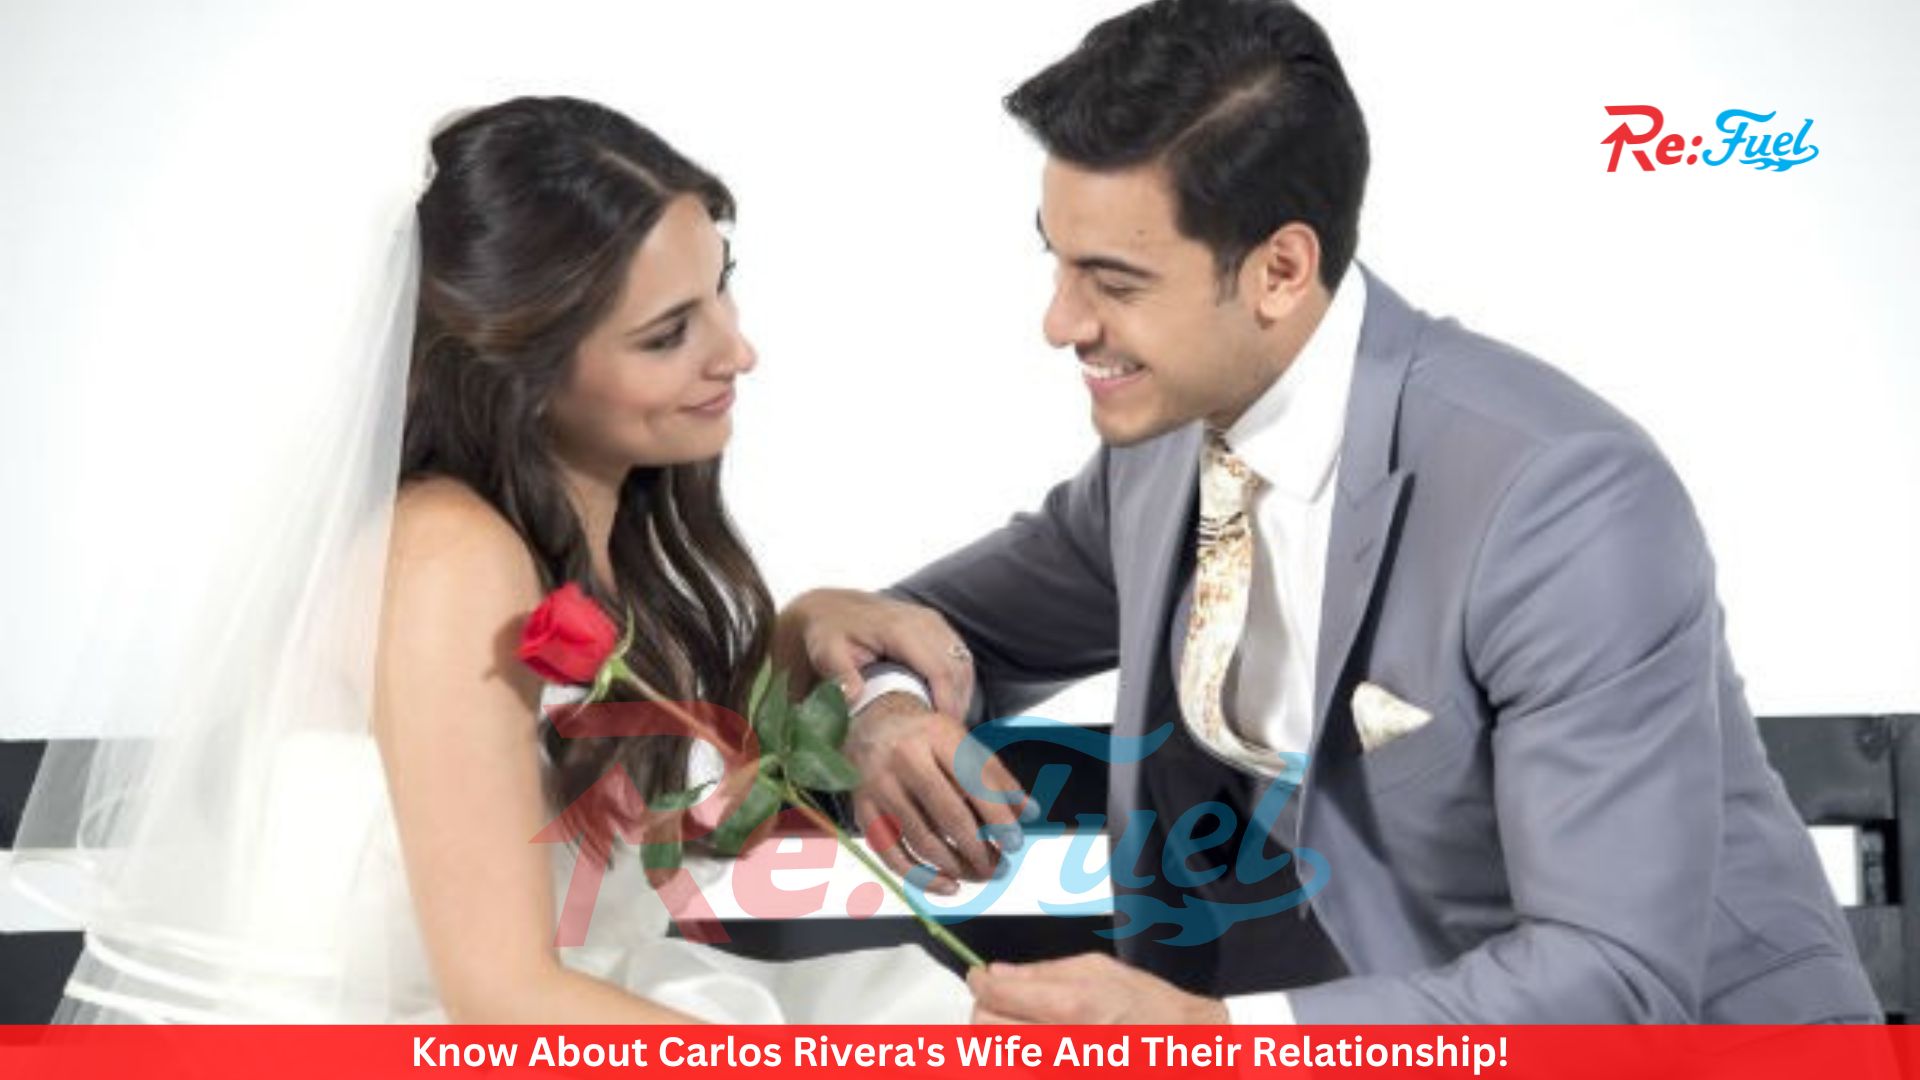 Know About Carlos Rivera's Wife And Their Relationship!